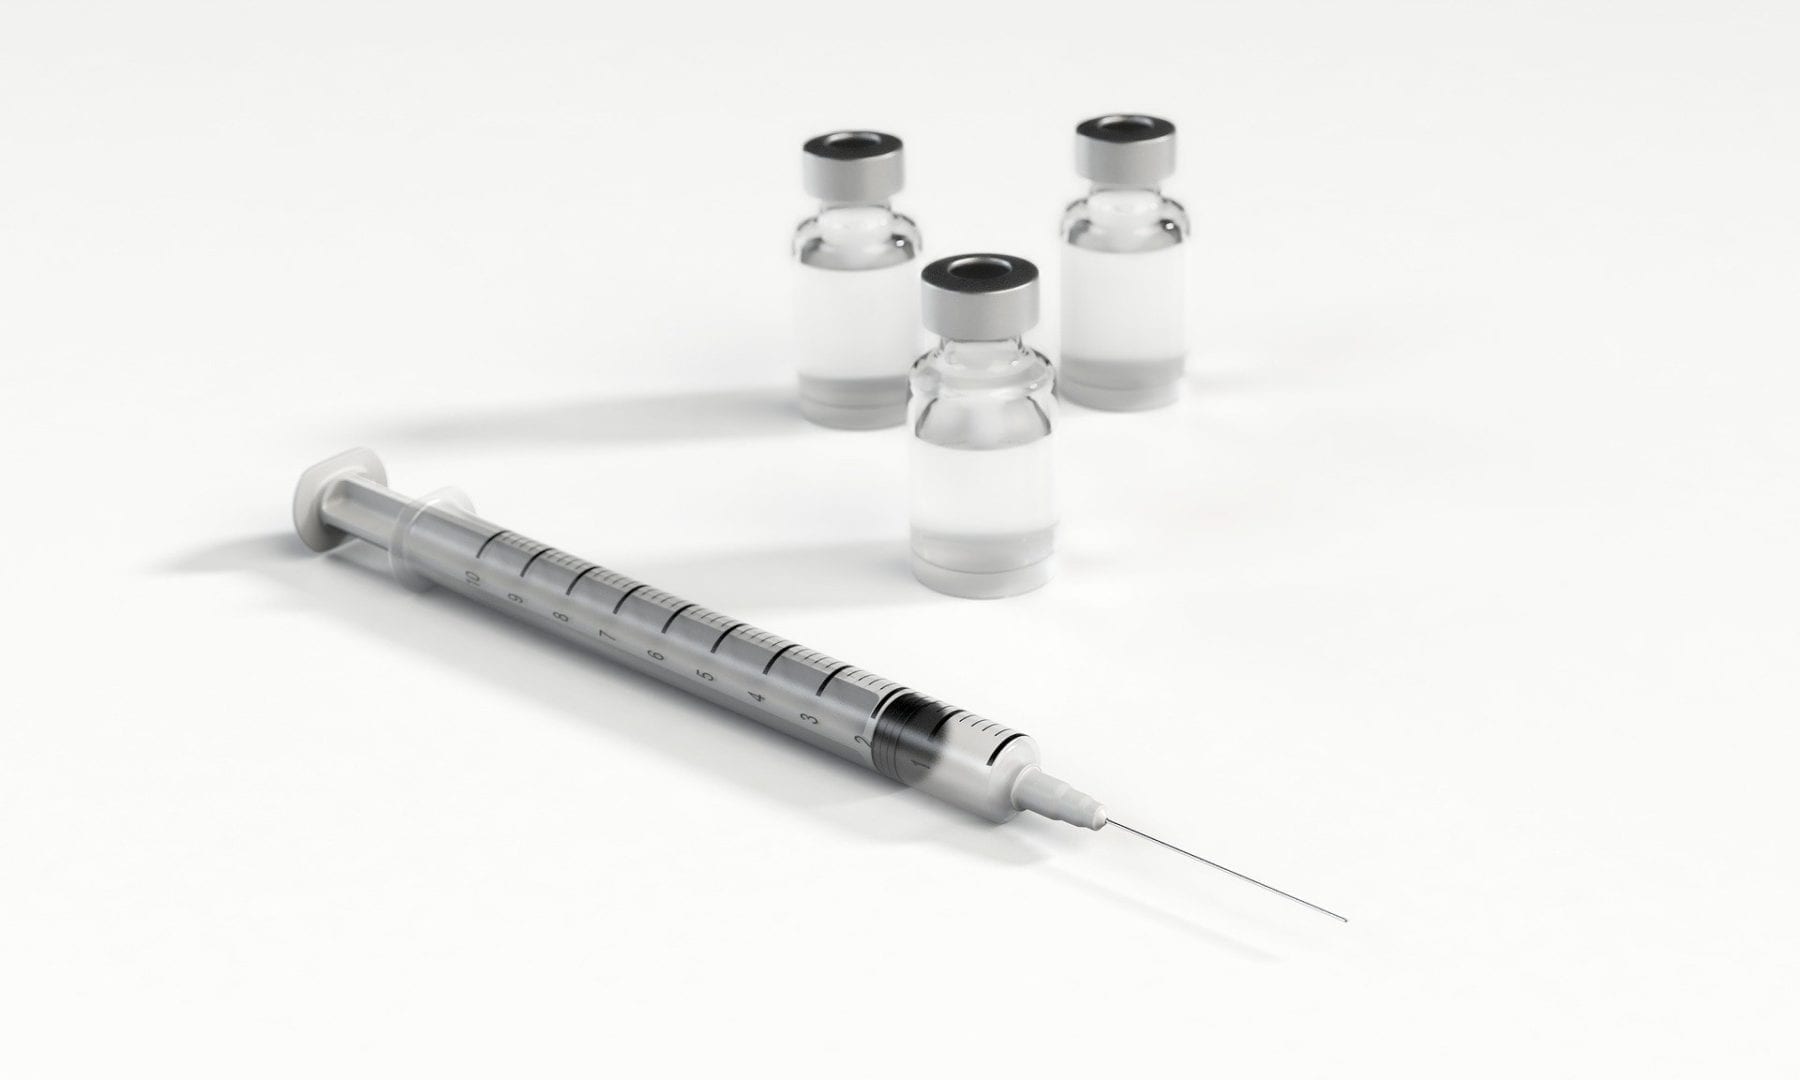 Personalized anticancer vaccines